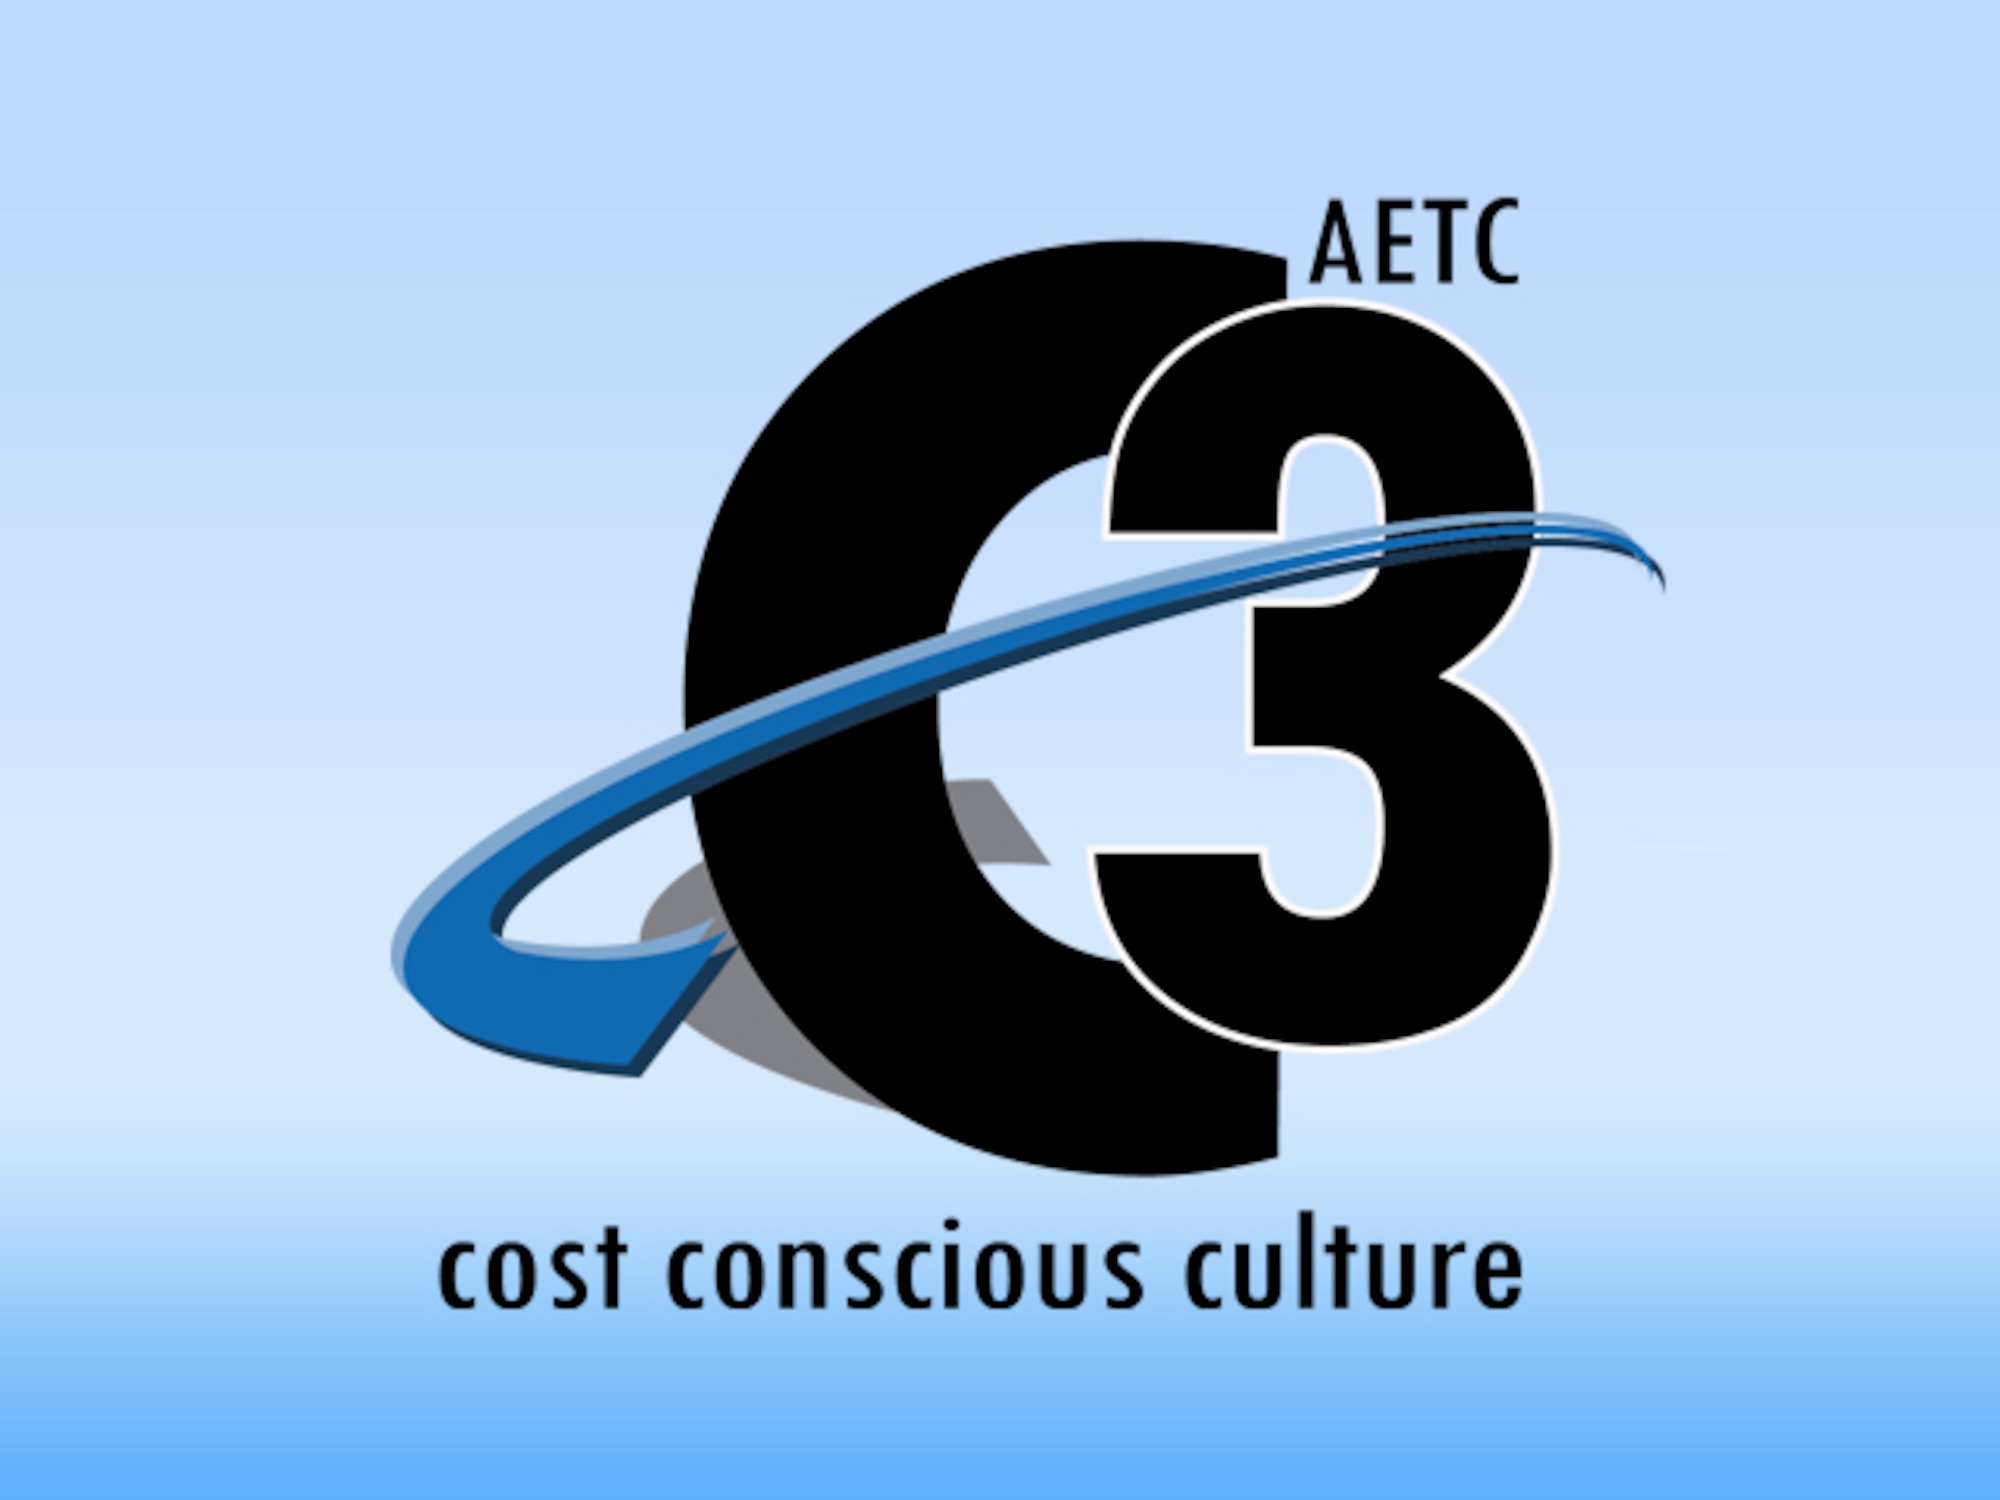 AETC launches plans to develop a cost conscious culture to achieve savings. (AF graphic/Dianne Moffett)